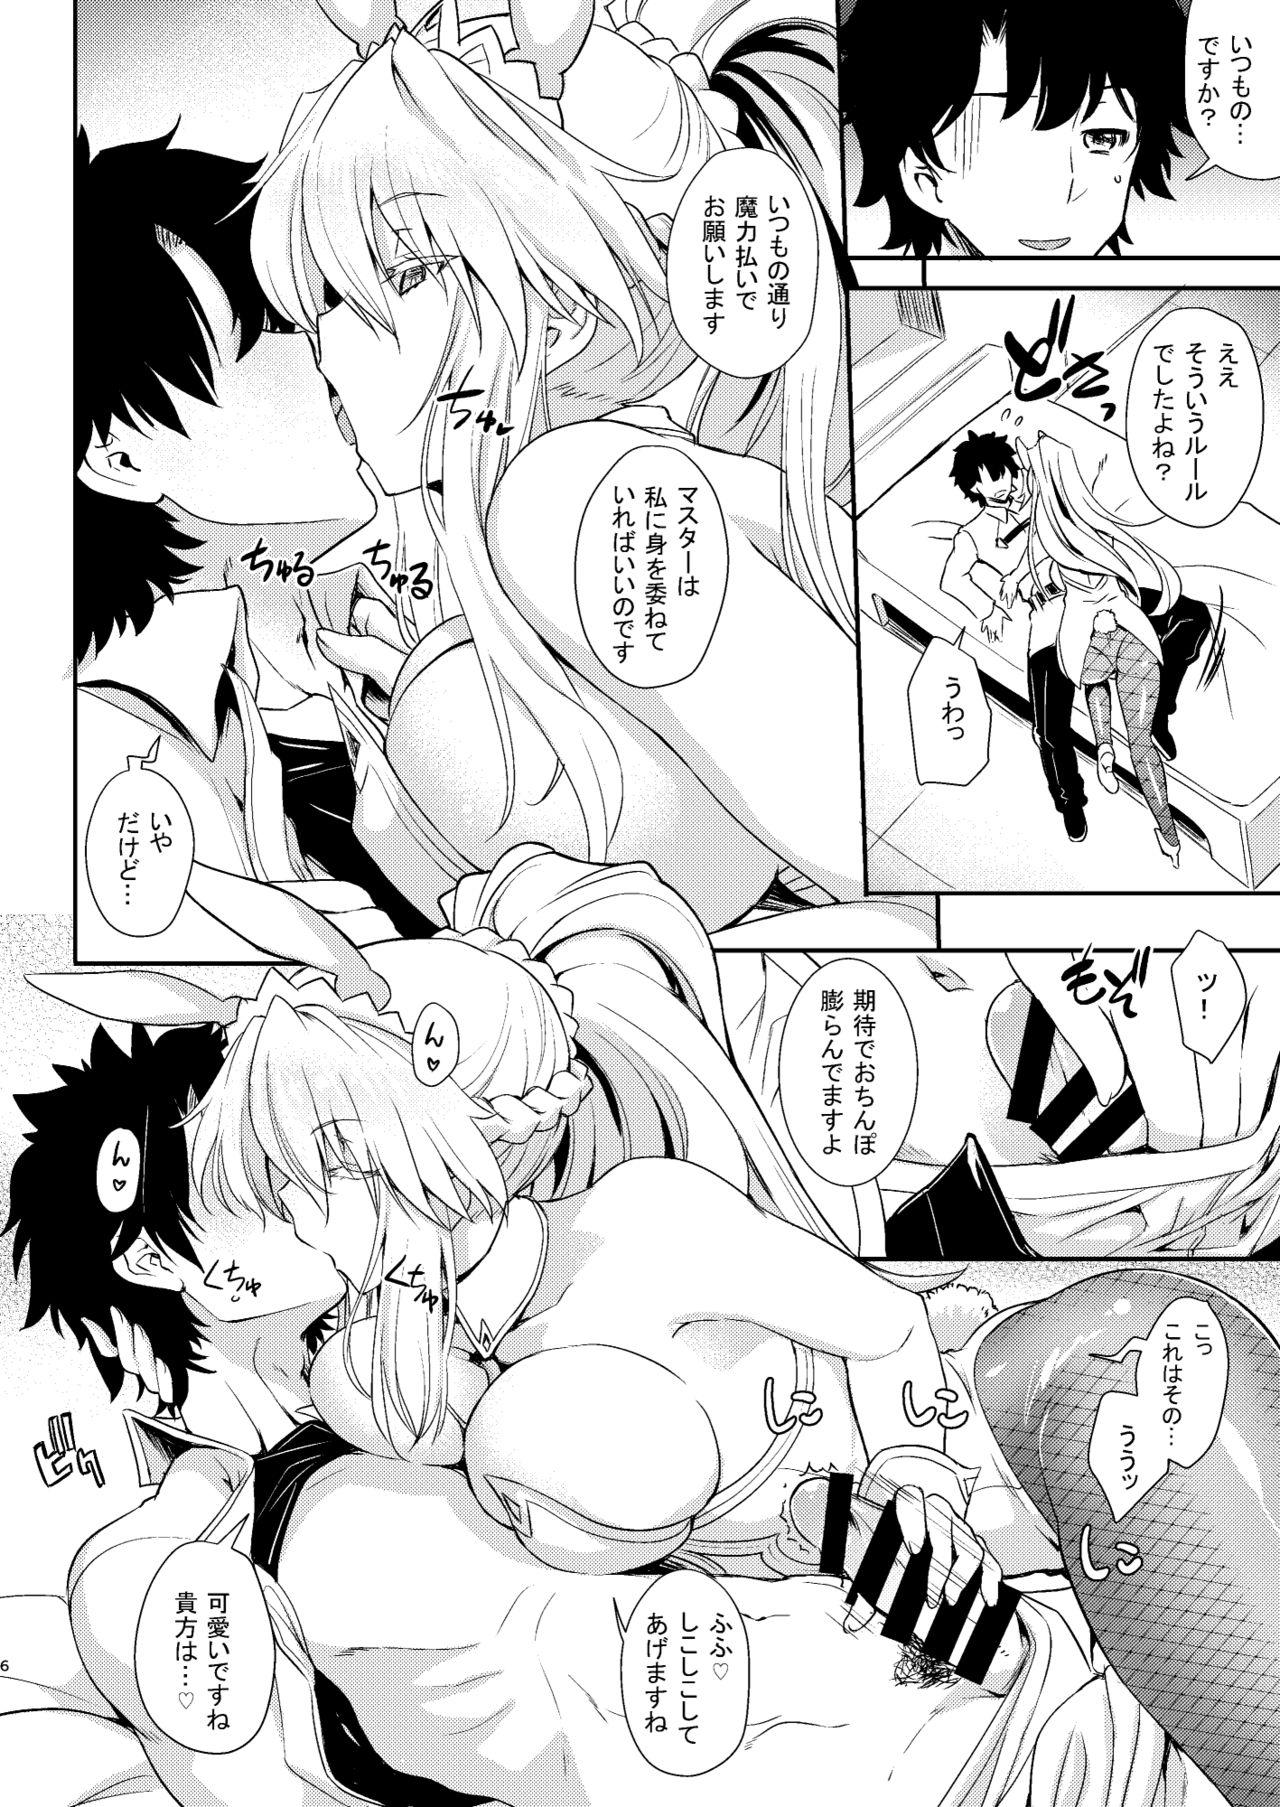 Sola Place your bets please - Fate grand order Smalltits - Page 6